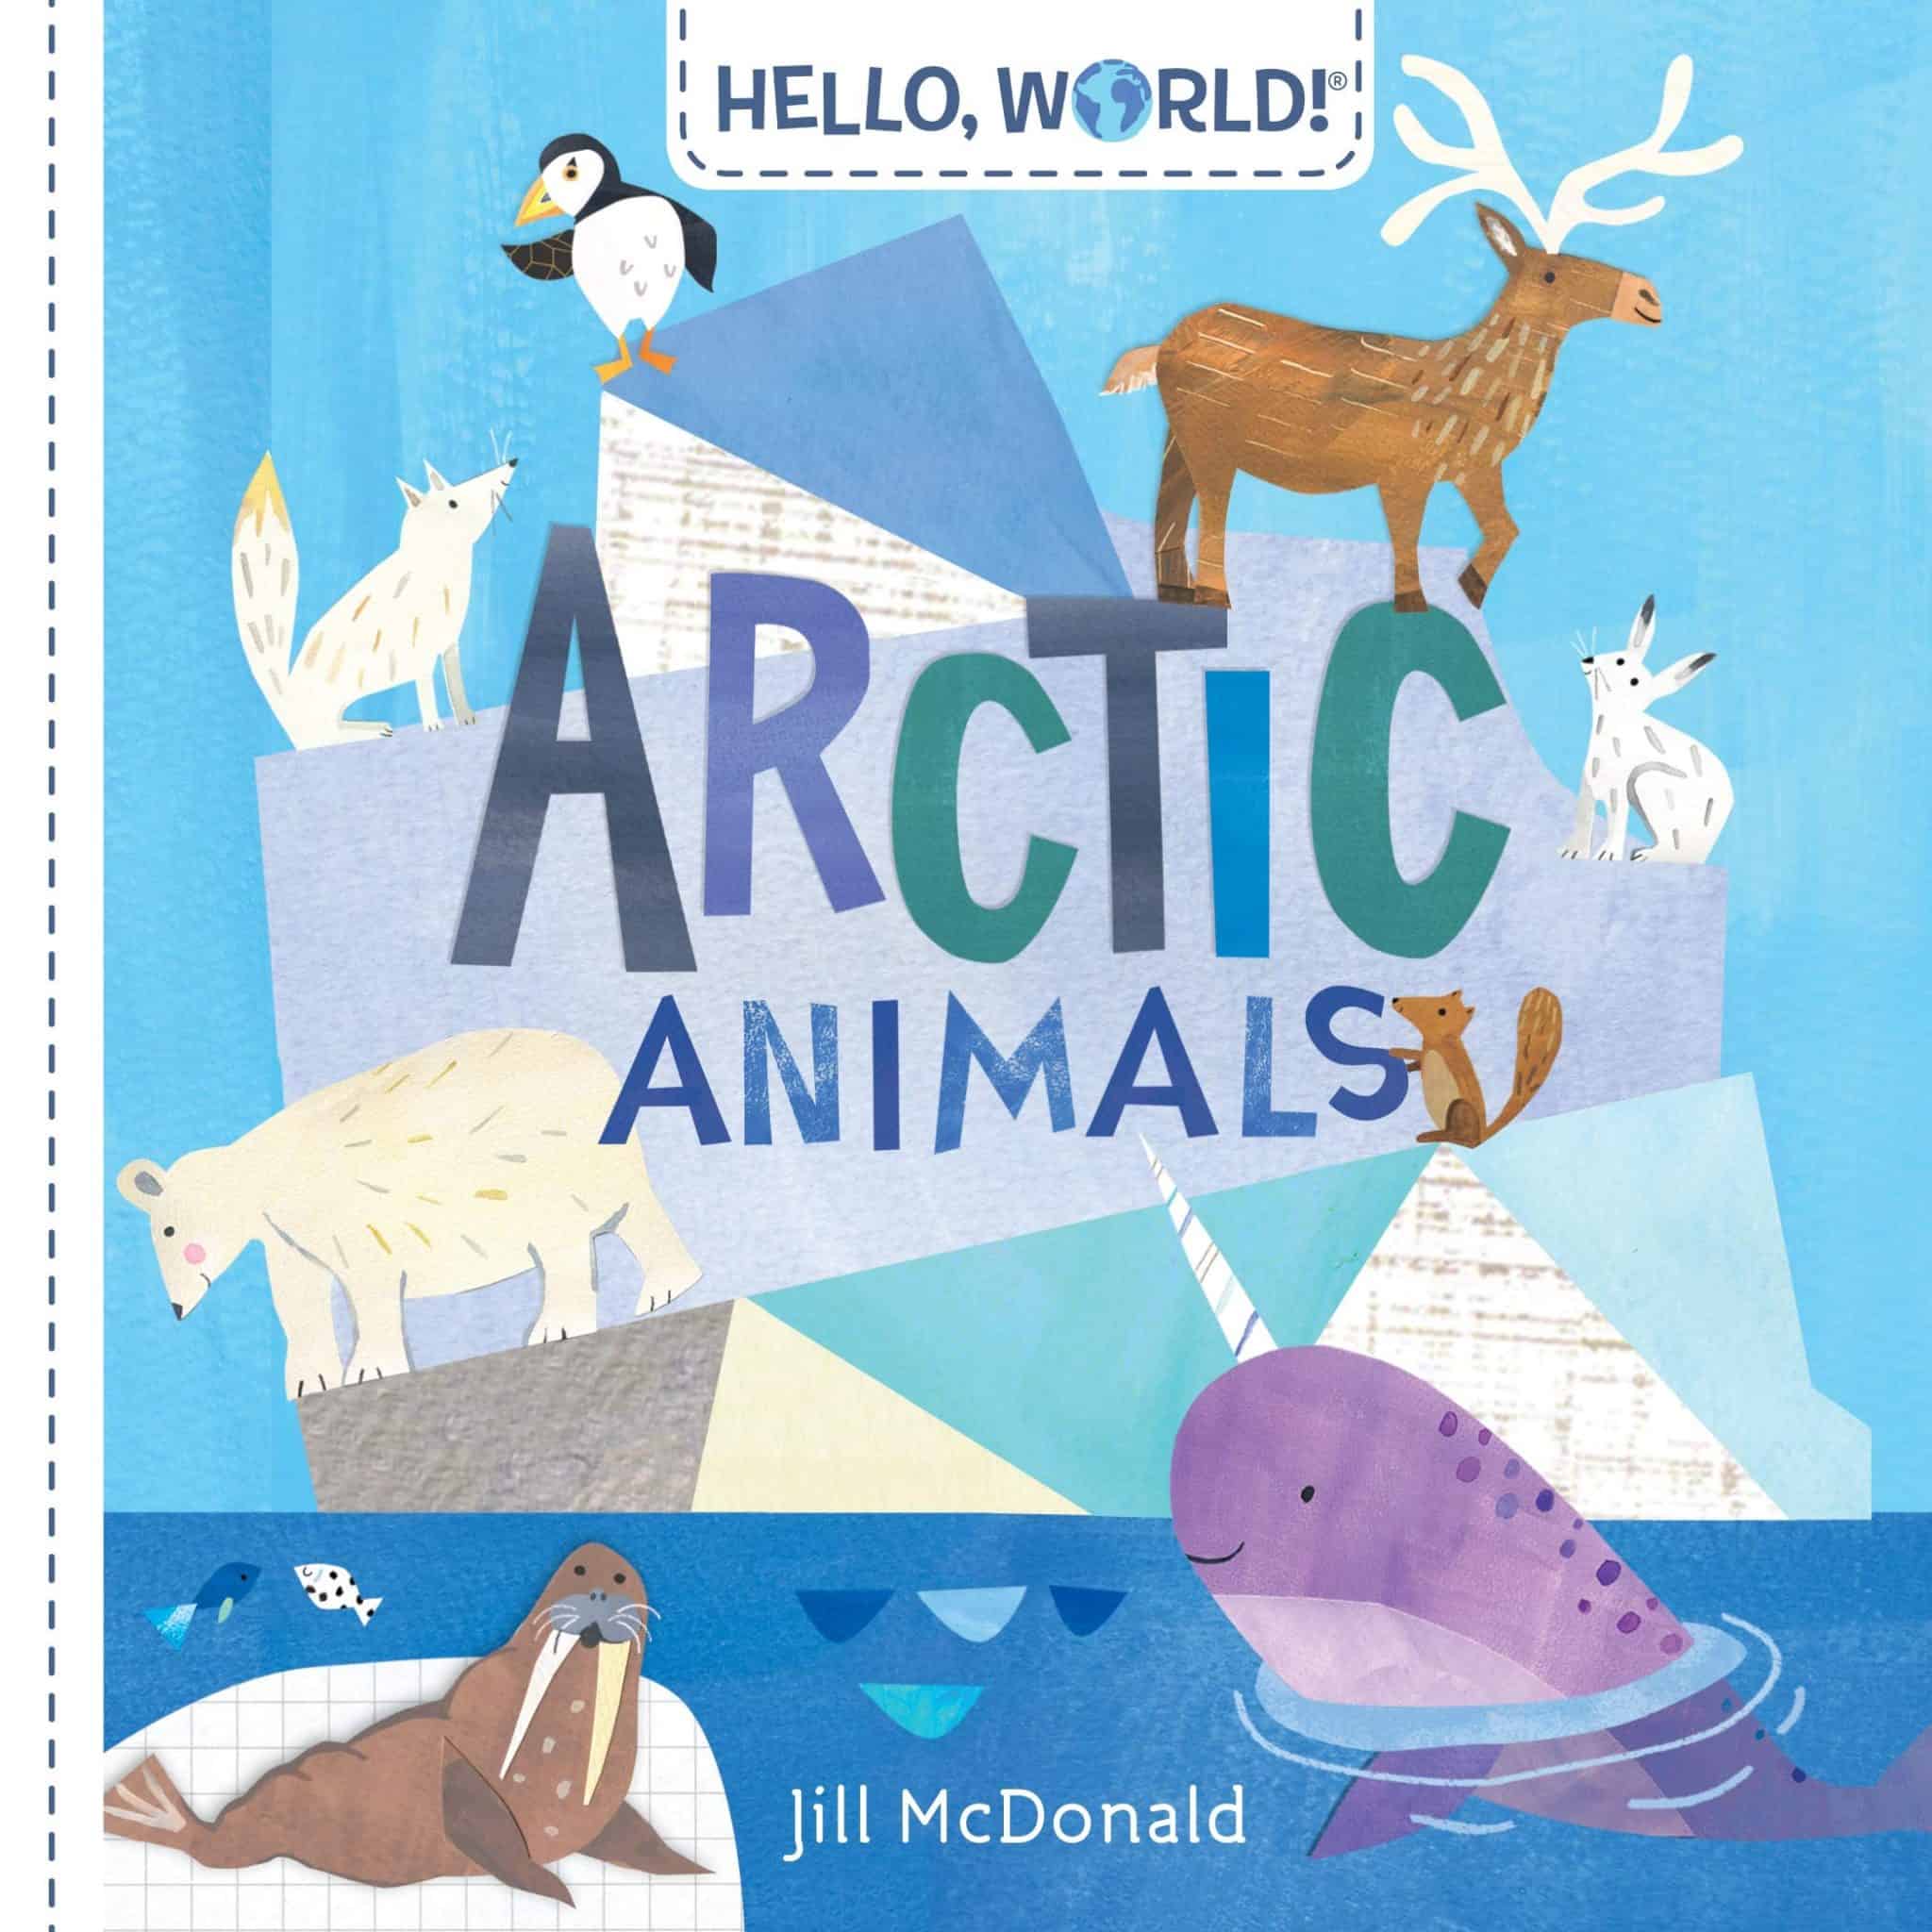 arctic animals book for toddlers 